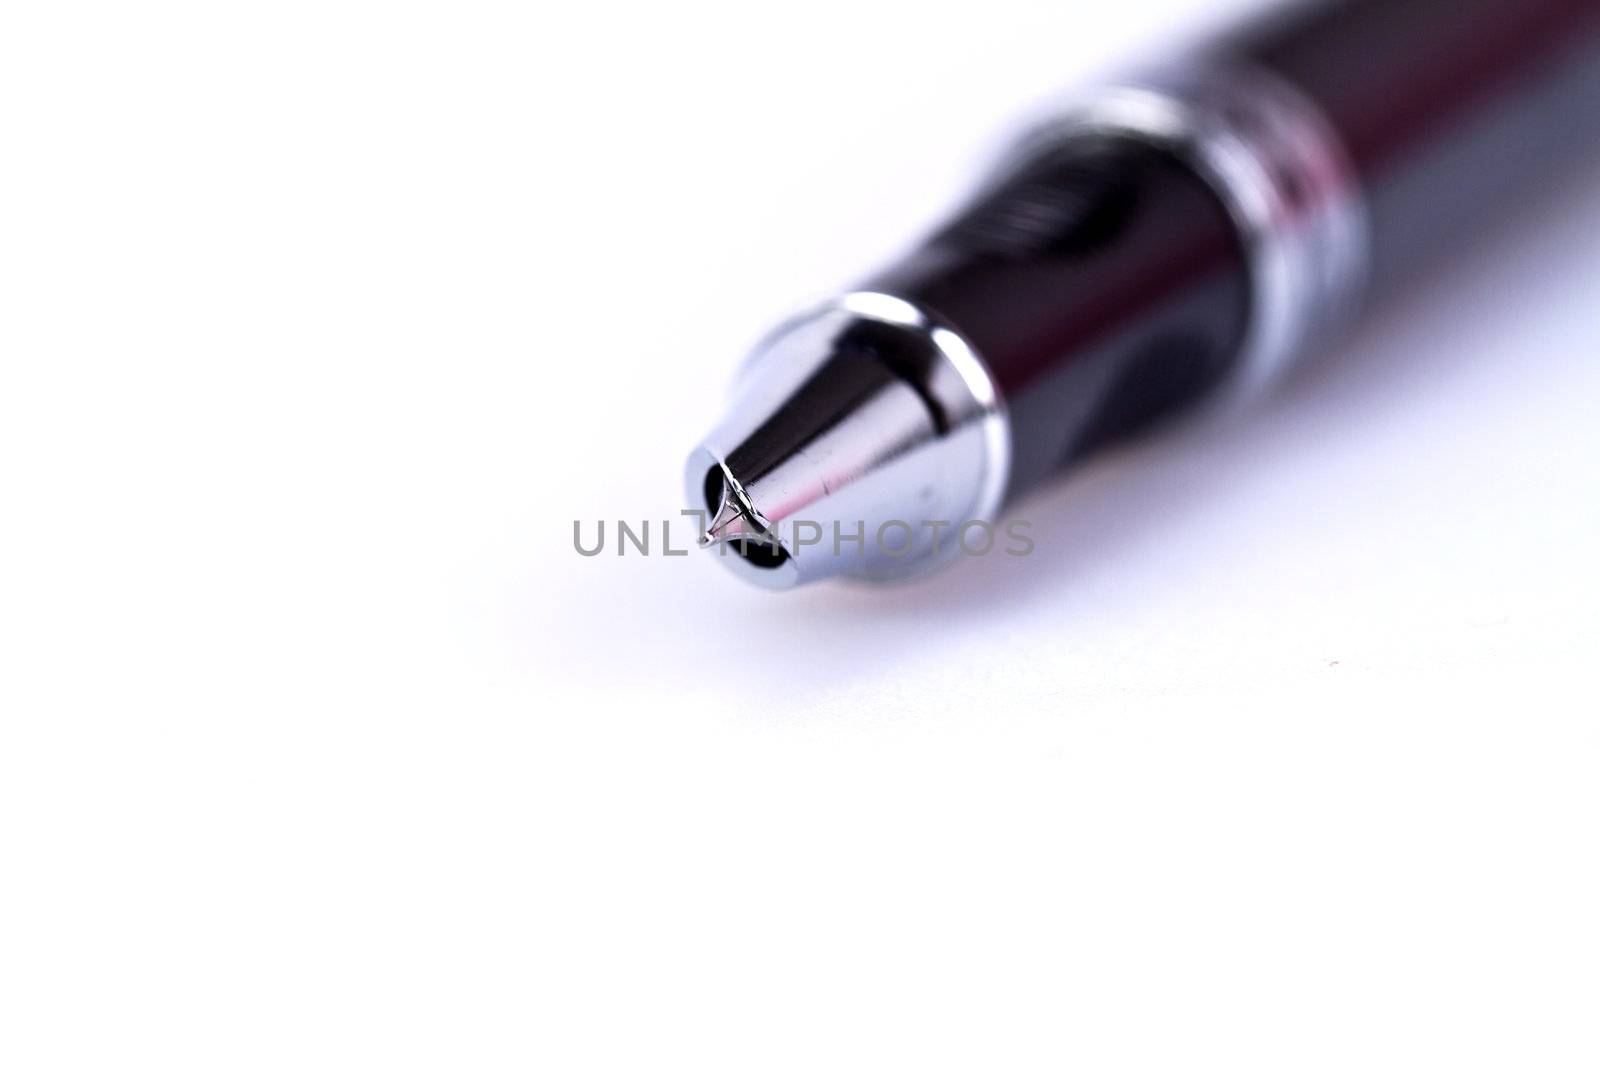 Close up view of a black fountain pen on white surface